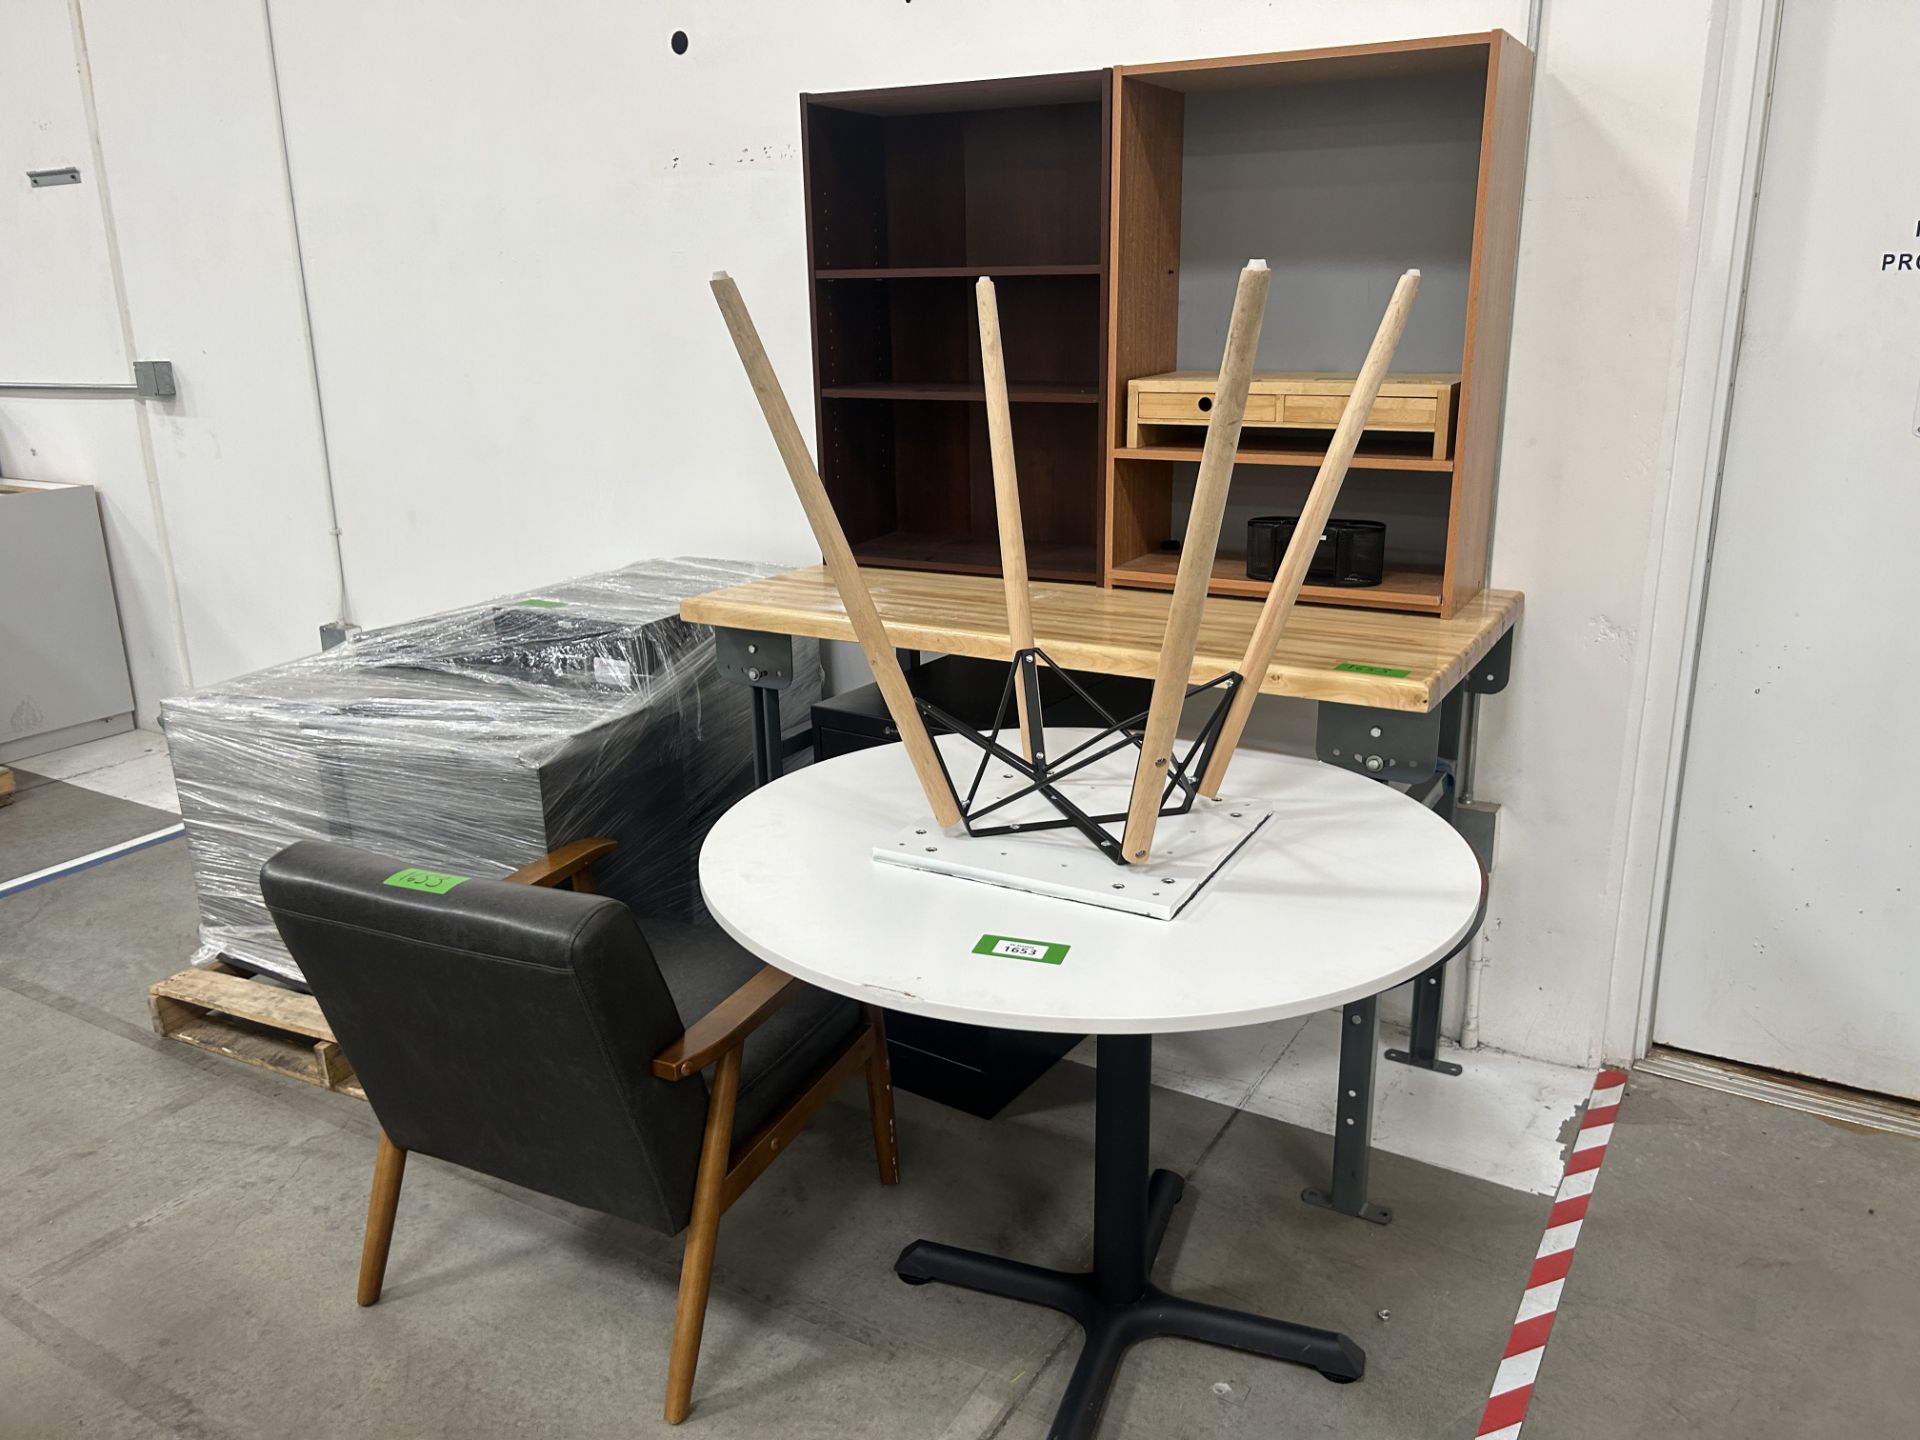 Round Tables, Work Tables and Filing Cabinets